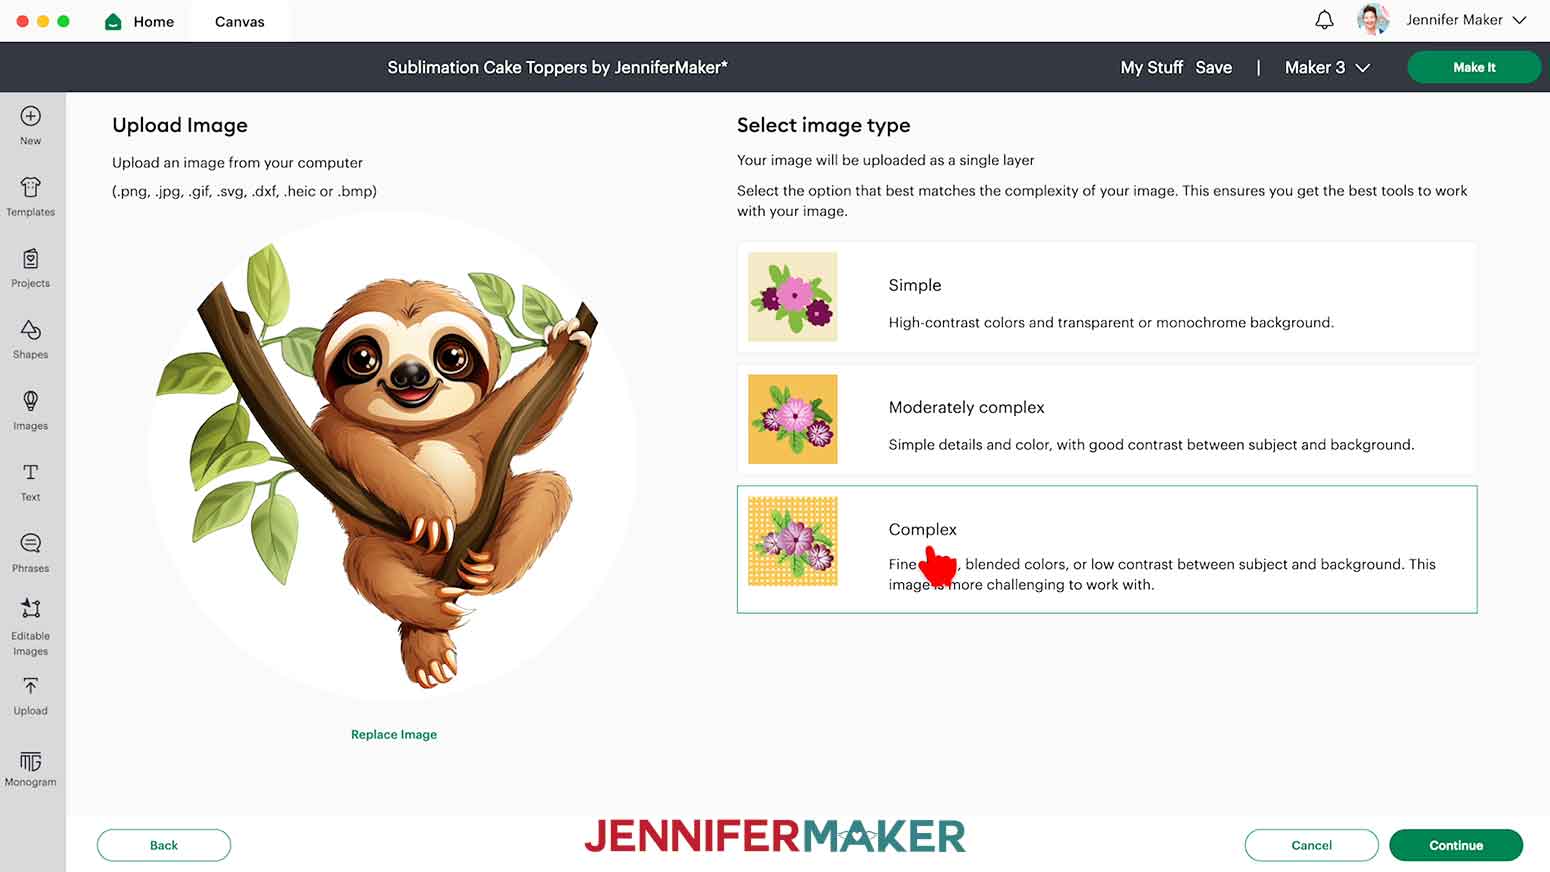 Upload the sloth PNG to Design Space and select Complex for the image type.